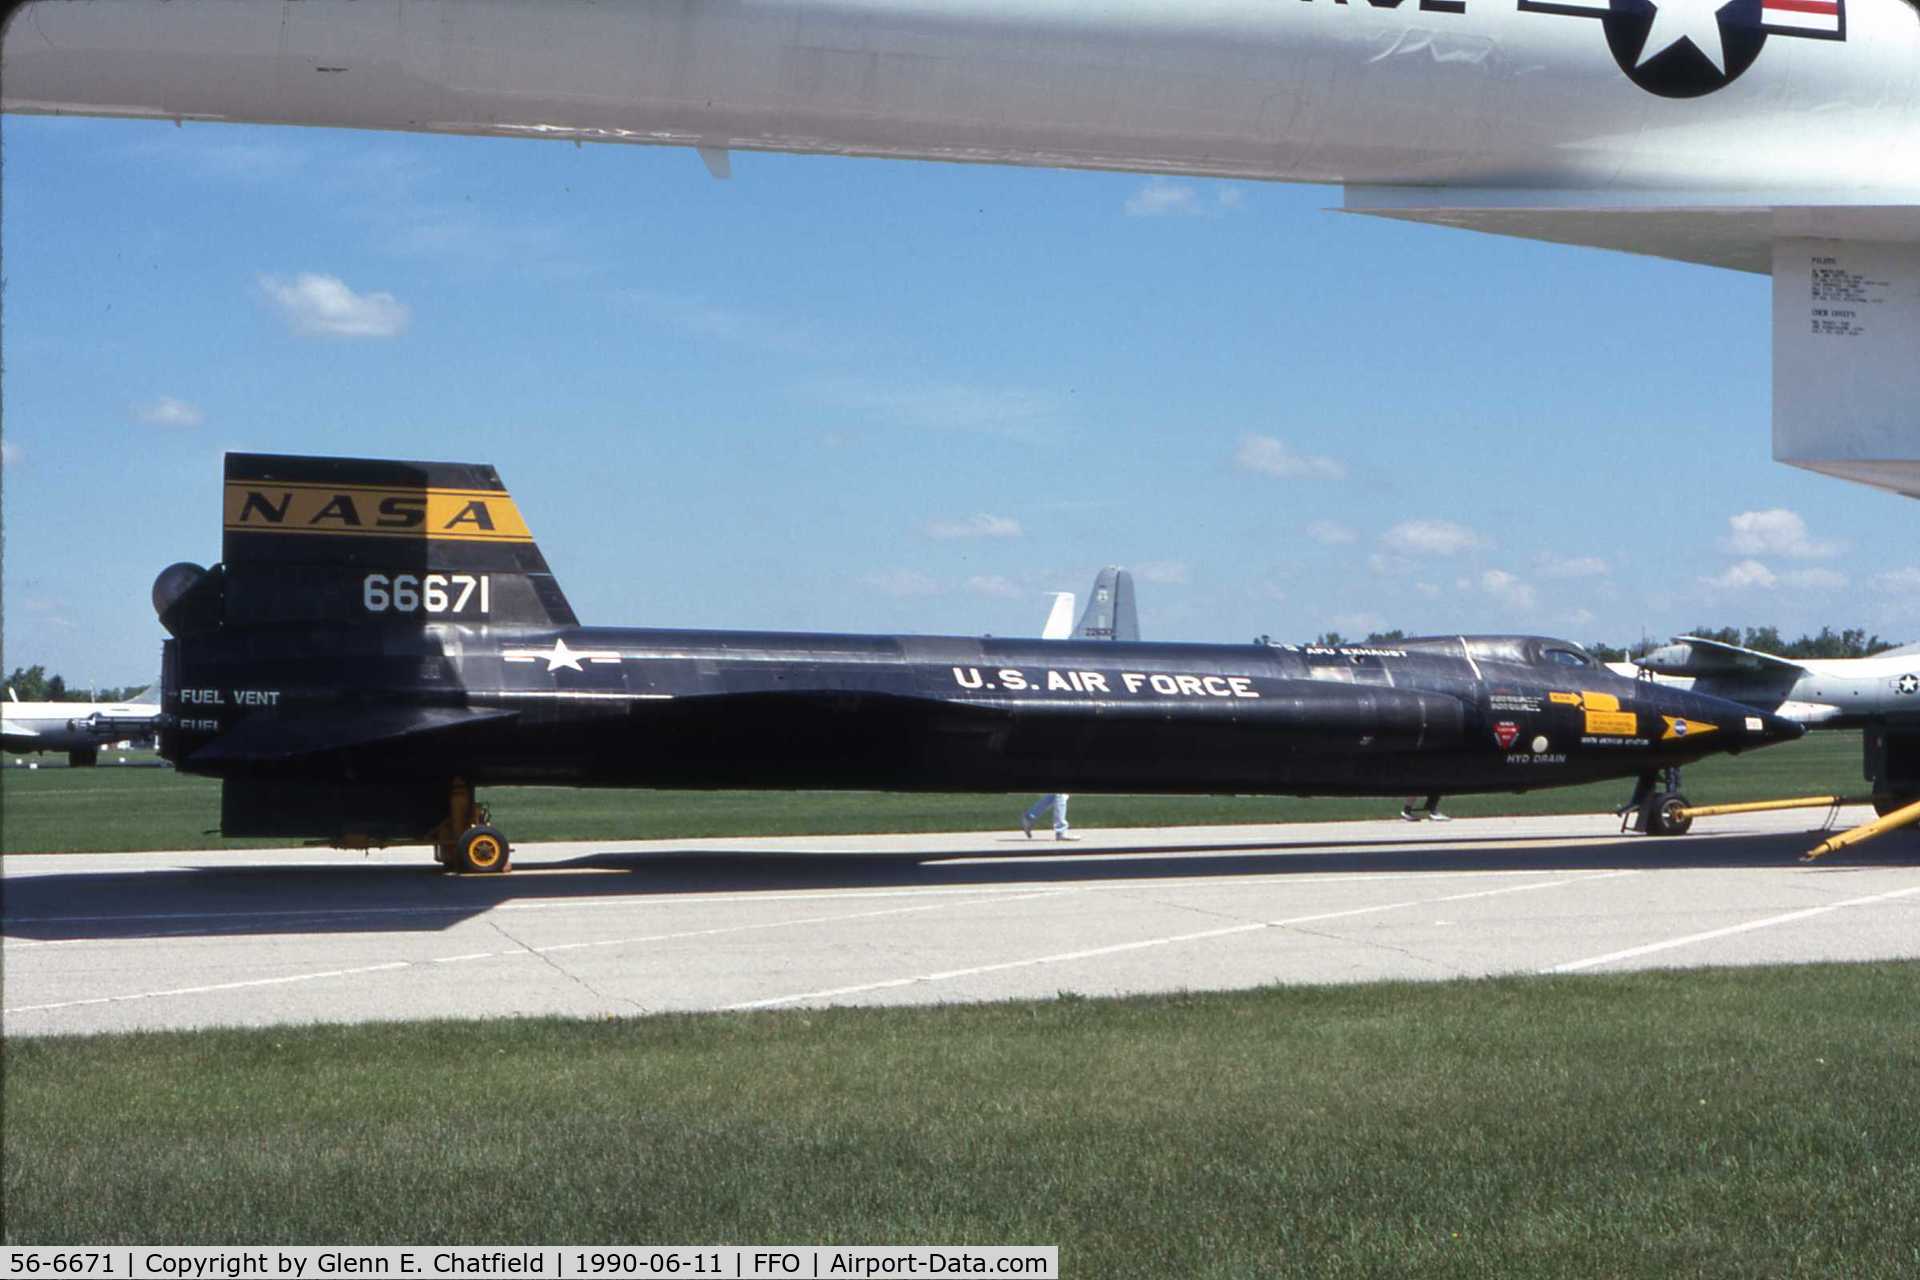 56-6671, 1956 North American X-15A-2 C/N 240-2, X-15A-2 at the National Museum of the U.S. Air Force